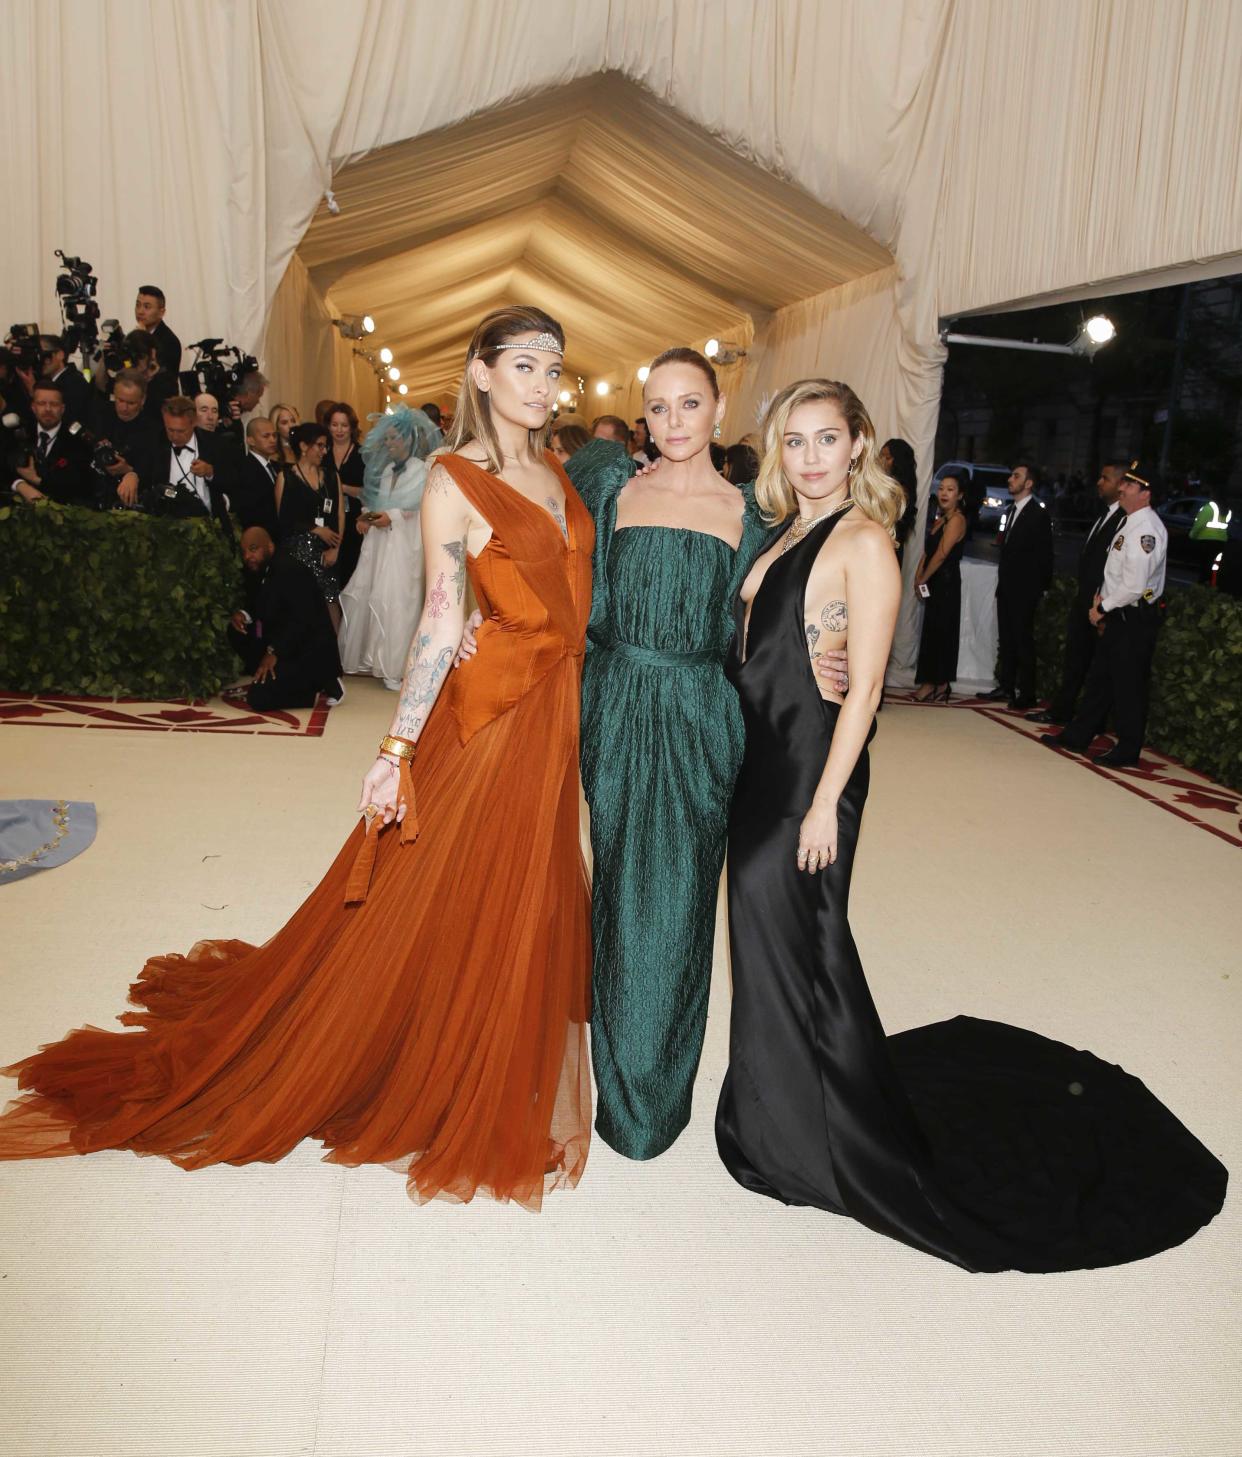 Paris Jackson, Stella McCartney and Singer-Songwriter Miley Cyrus arrive at the Metropolitan Museum of Art Costume Institute Gala (Met Gala) to celebrate the opening of “Heavenly Bodies: Fashion and the Catholic Imagination” in the Manhattan borough of New York, U.S., May 7, 2018. REUTERS/Carlo Allegri